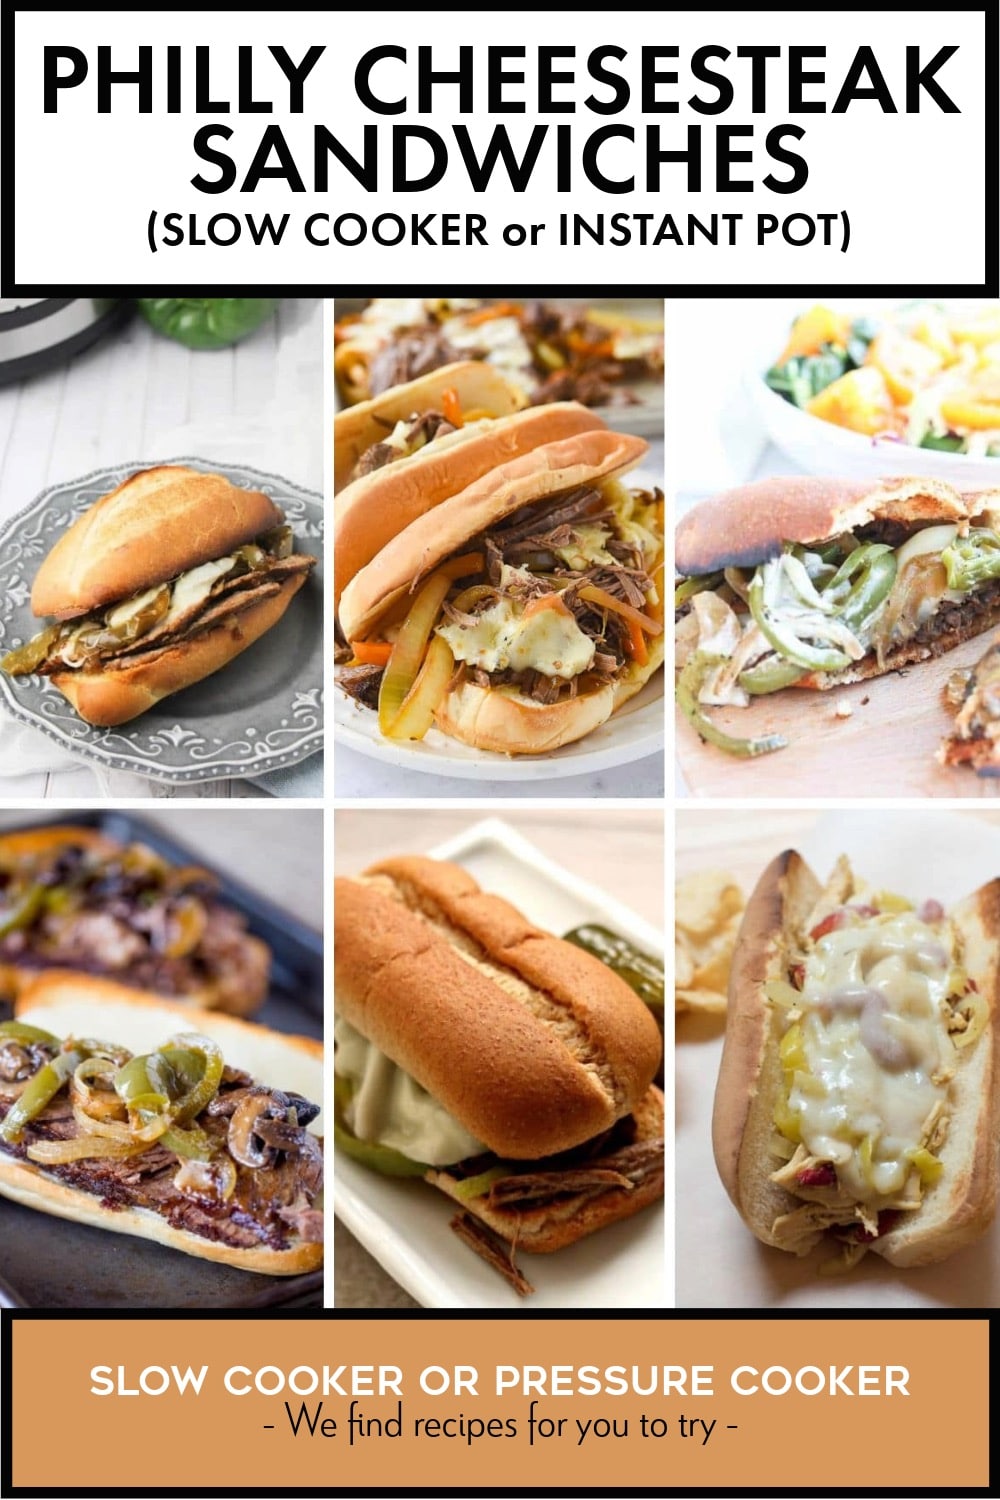 Pinterest image of Philly Cheesesteak Sandwiches (Slow Cooker or Instant Pot)